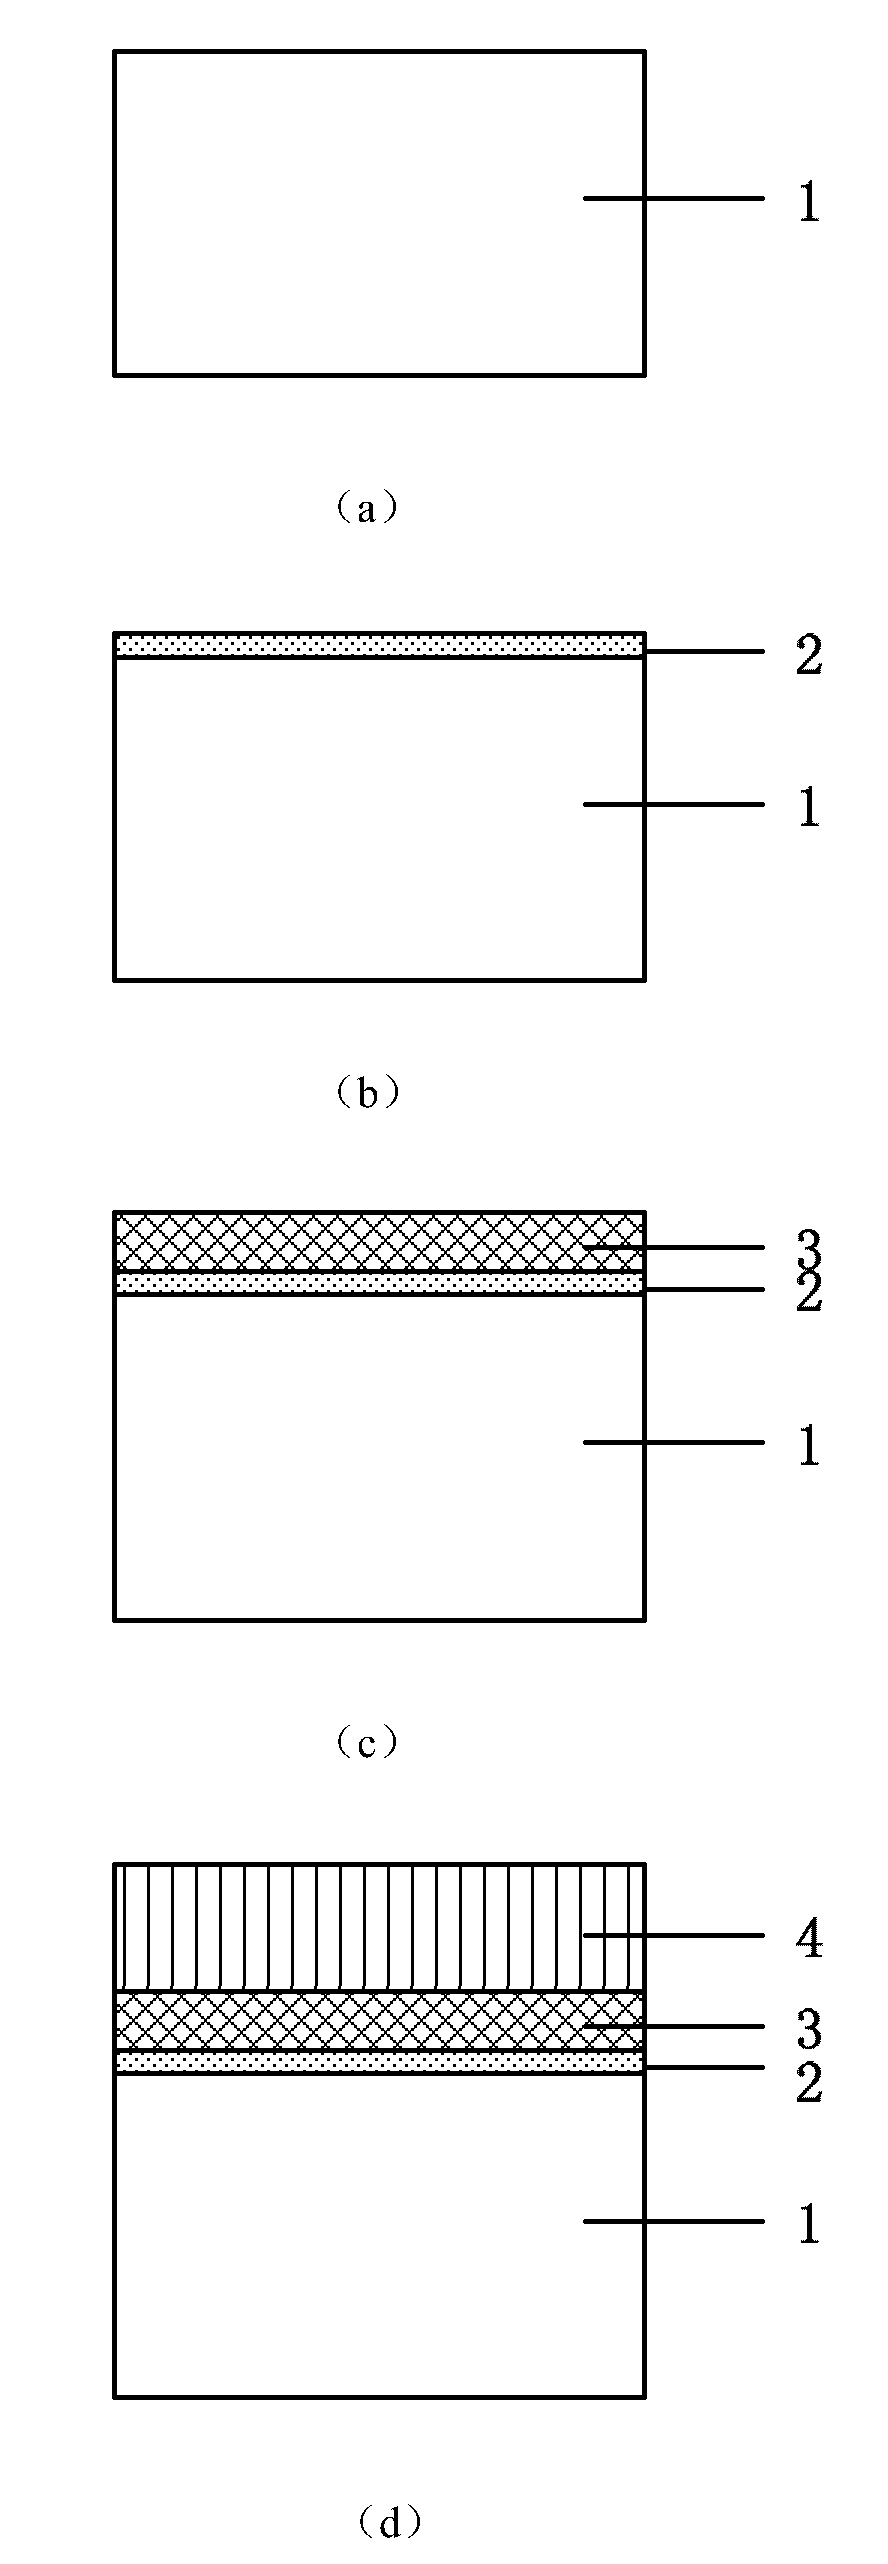 Surface passivation method for germanium-based MOS (Metal Oxide Semiconductor) device substrate